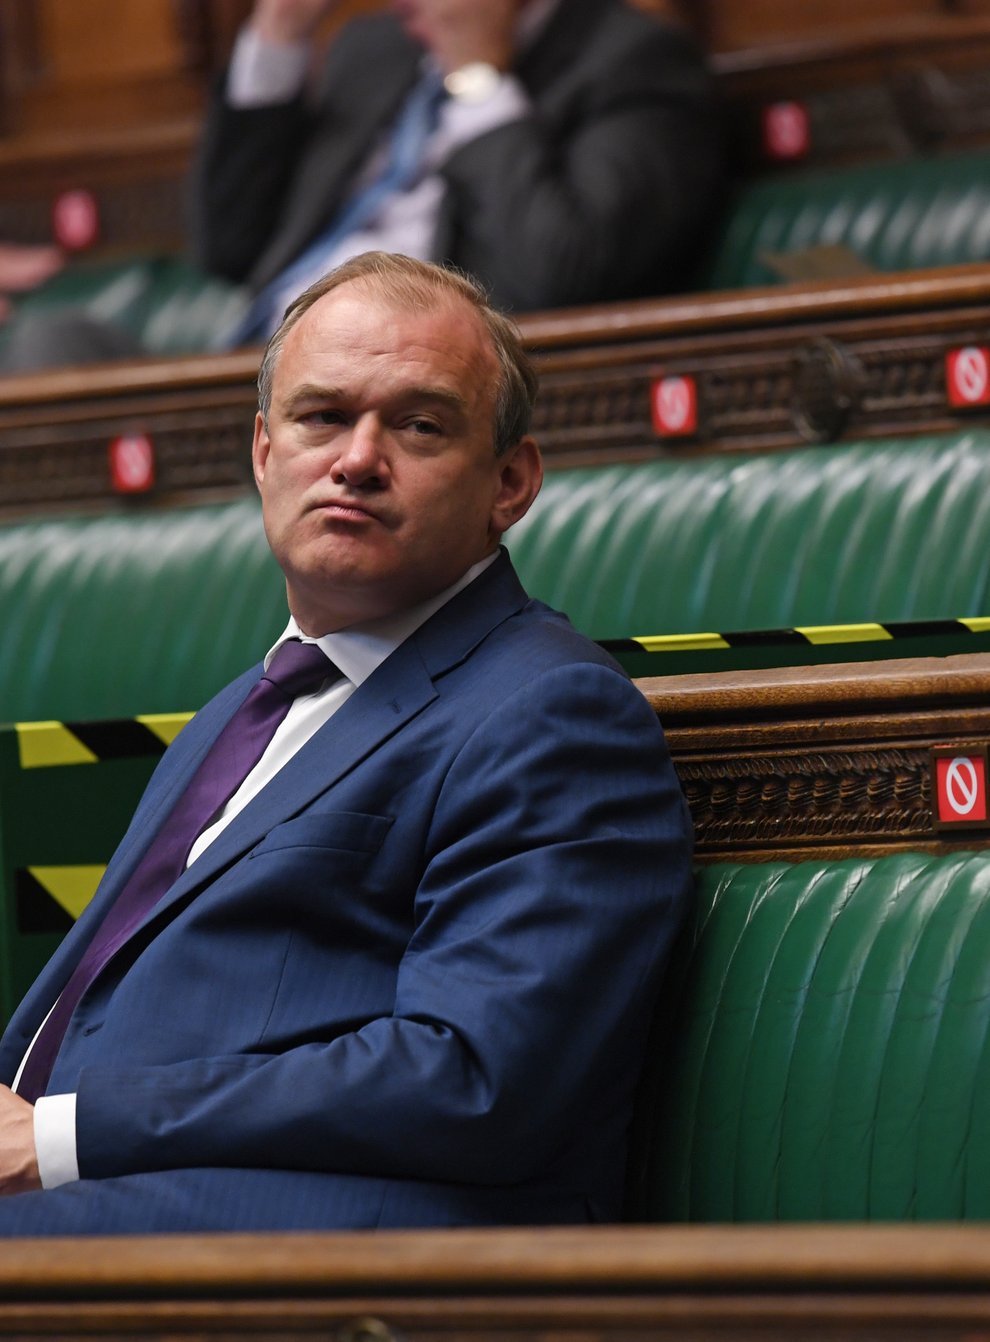 Sir Ed Davey in the Commons